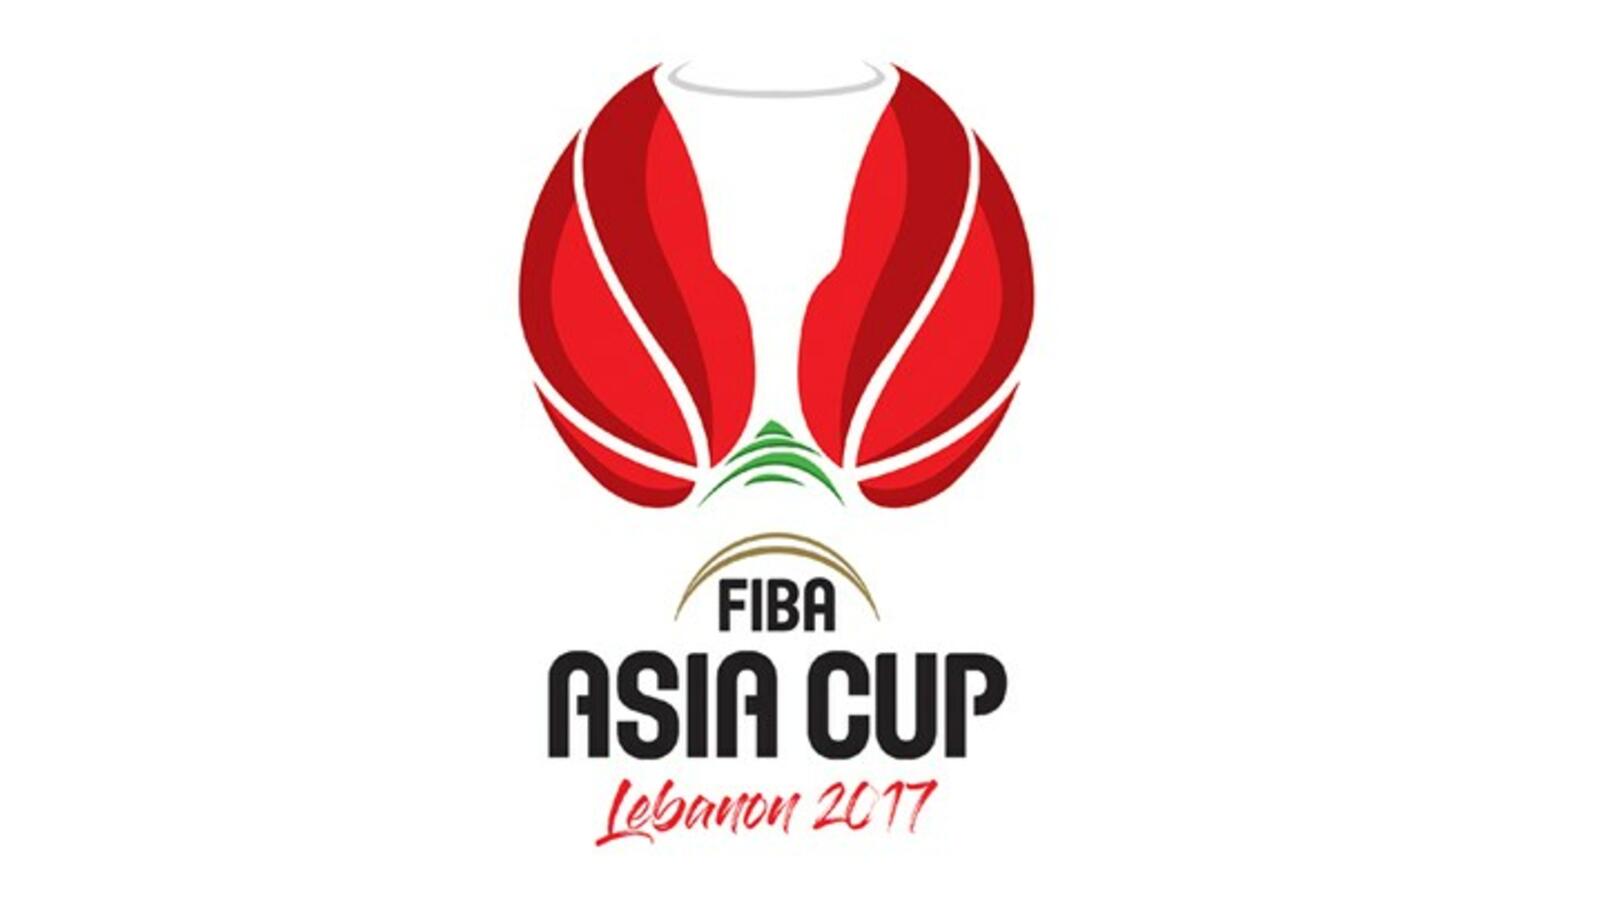 Lebanon Logo - FIBA Asia Cup set to tip off for first time in Lebanon | Al Bawaba